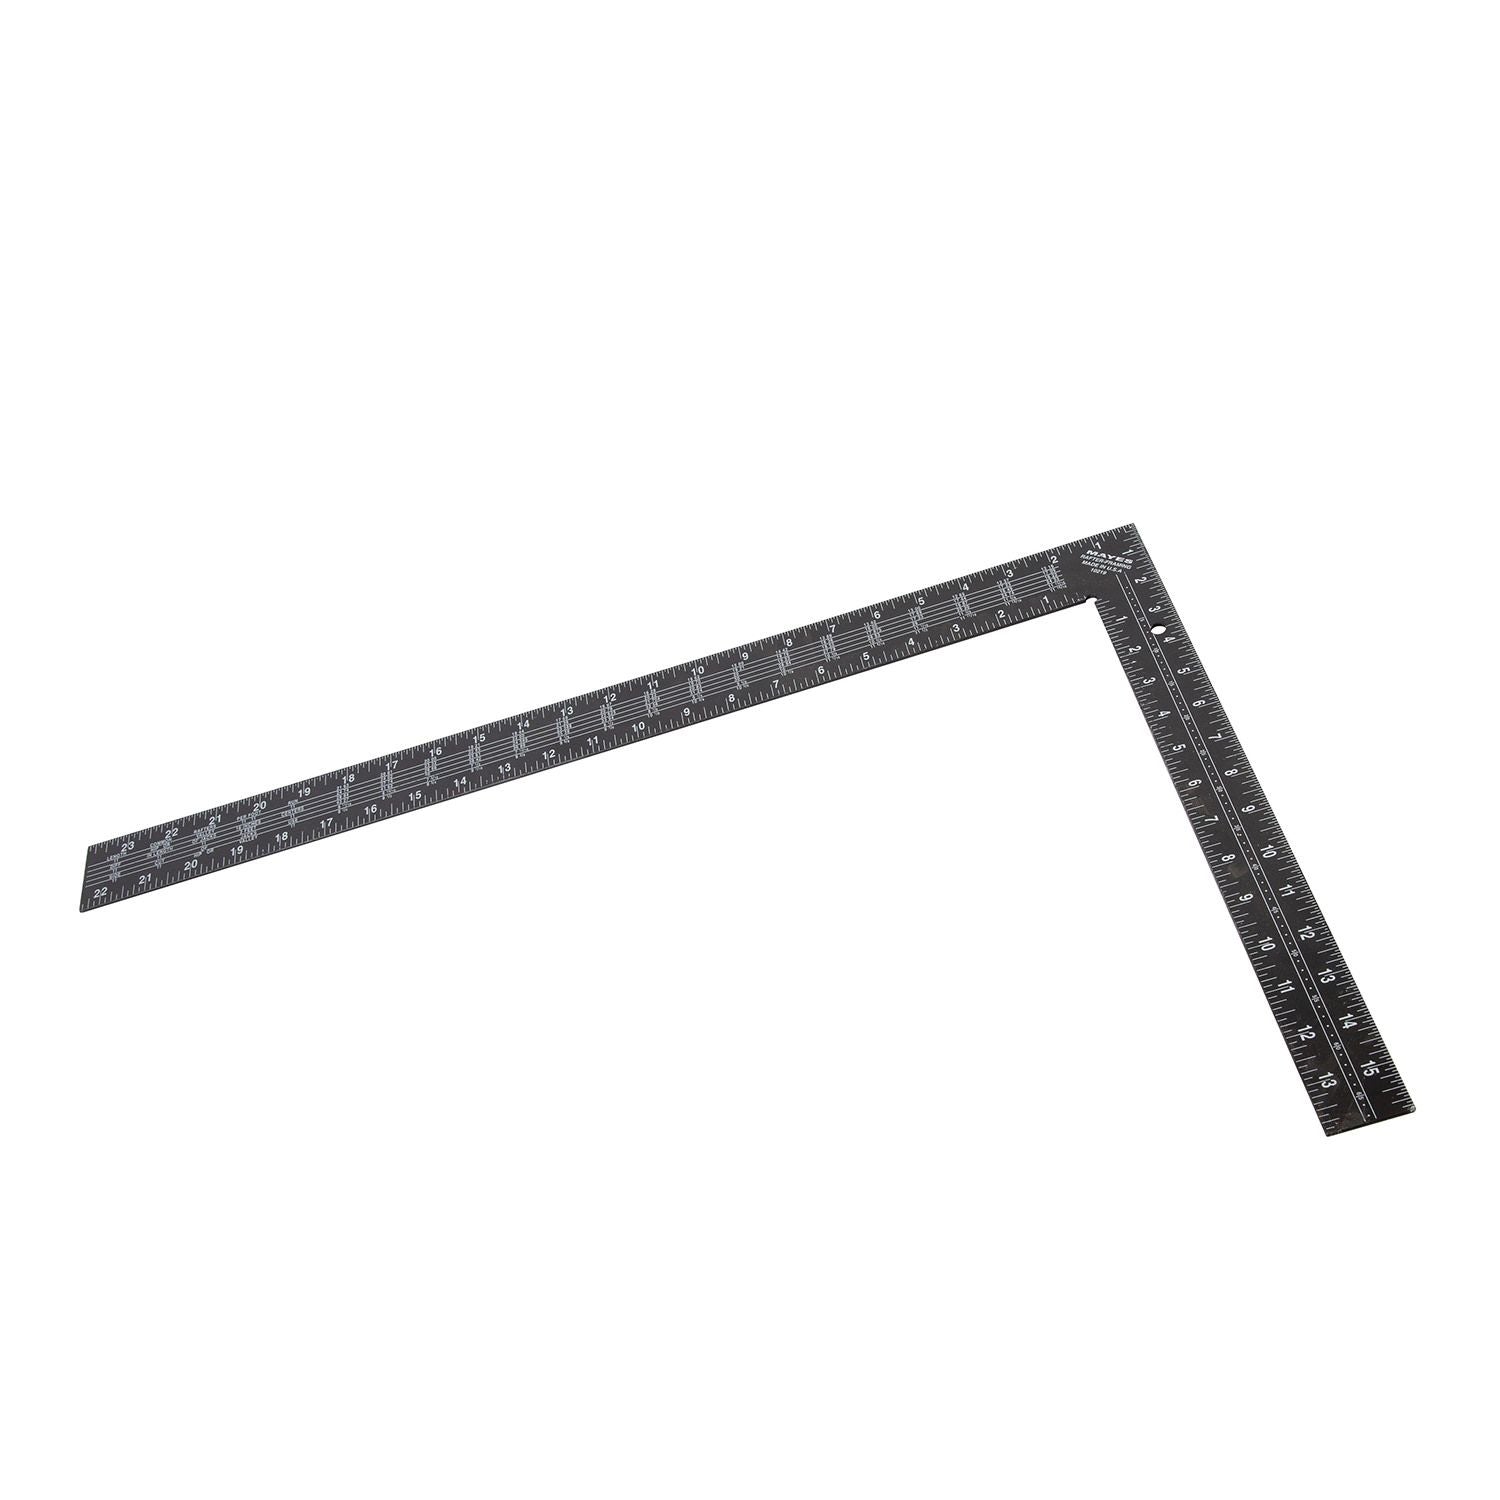 Mayes 16" X 24" Black Steel Rafter Square 10219-5